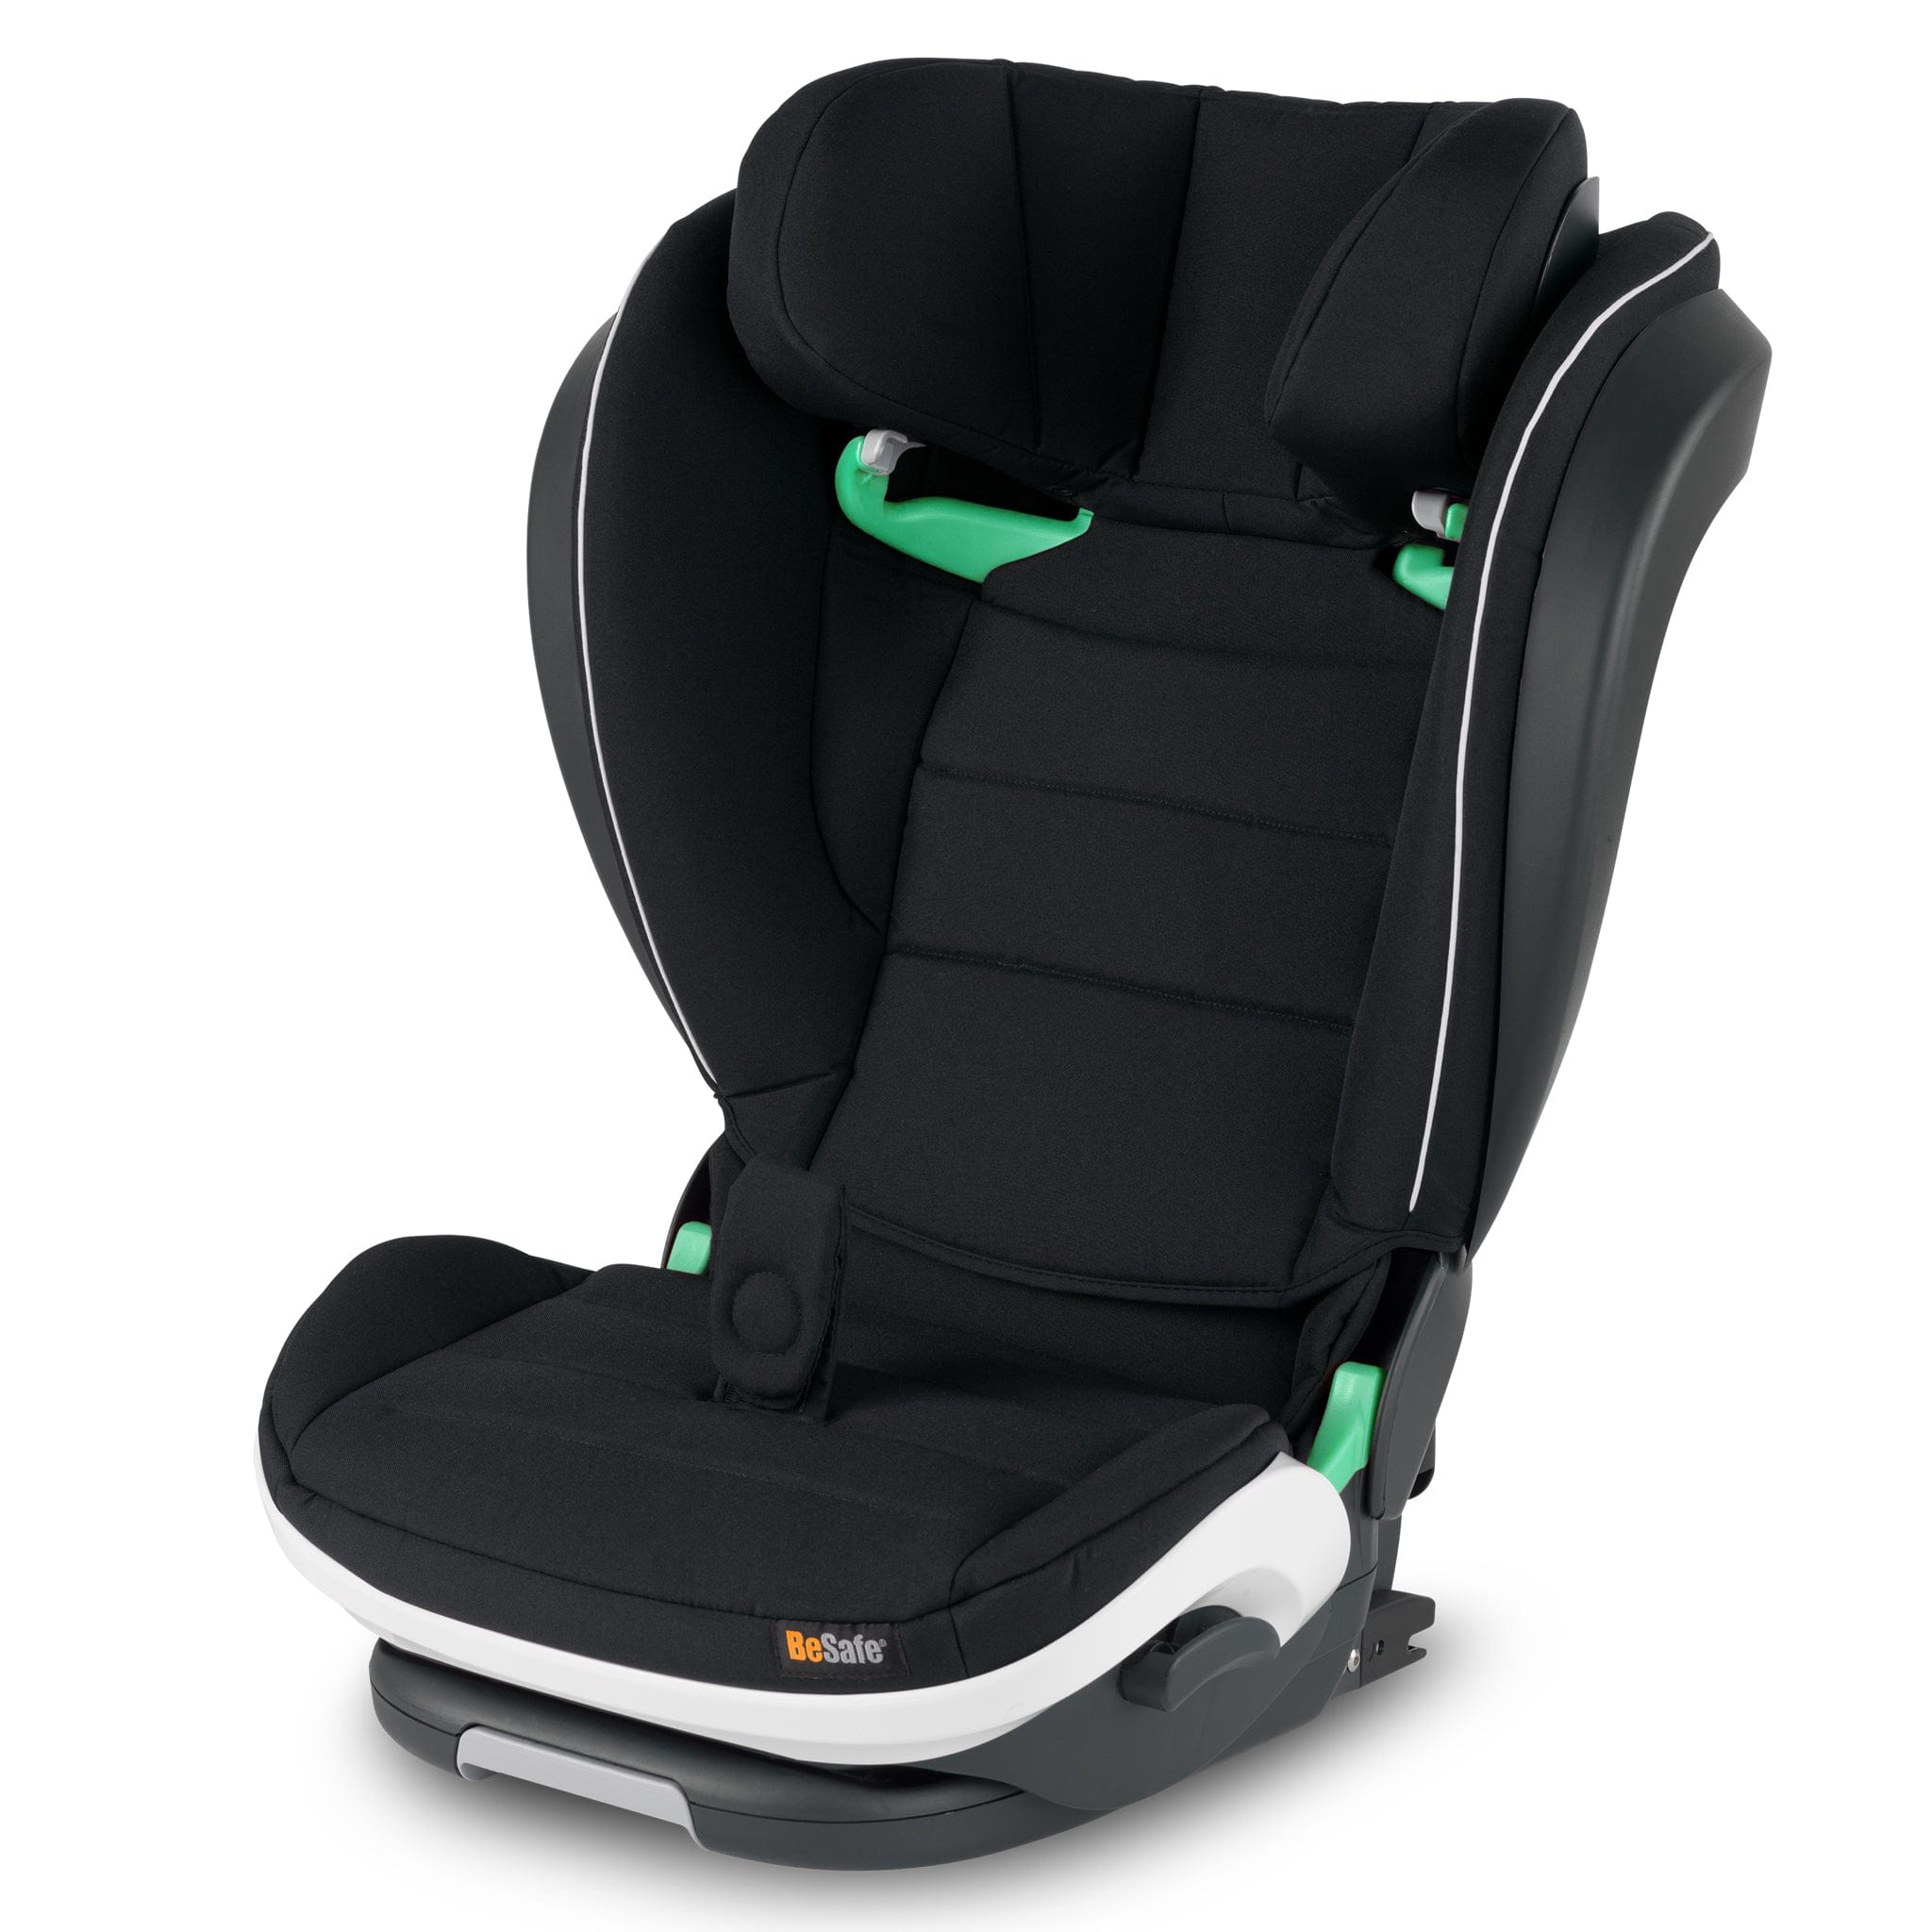 Best-Selling Car Seat Cushion on  Now 27% Off - GVS - Global